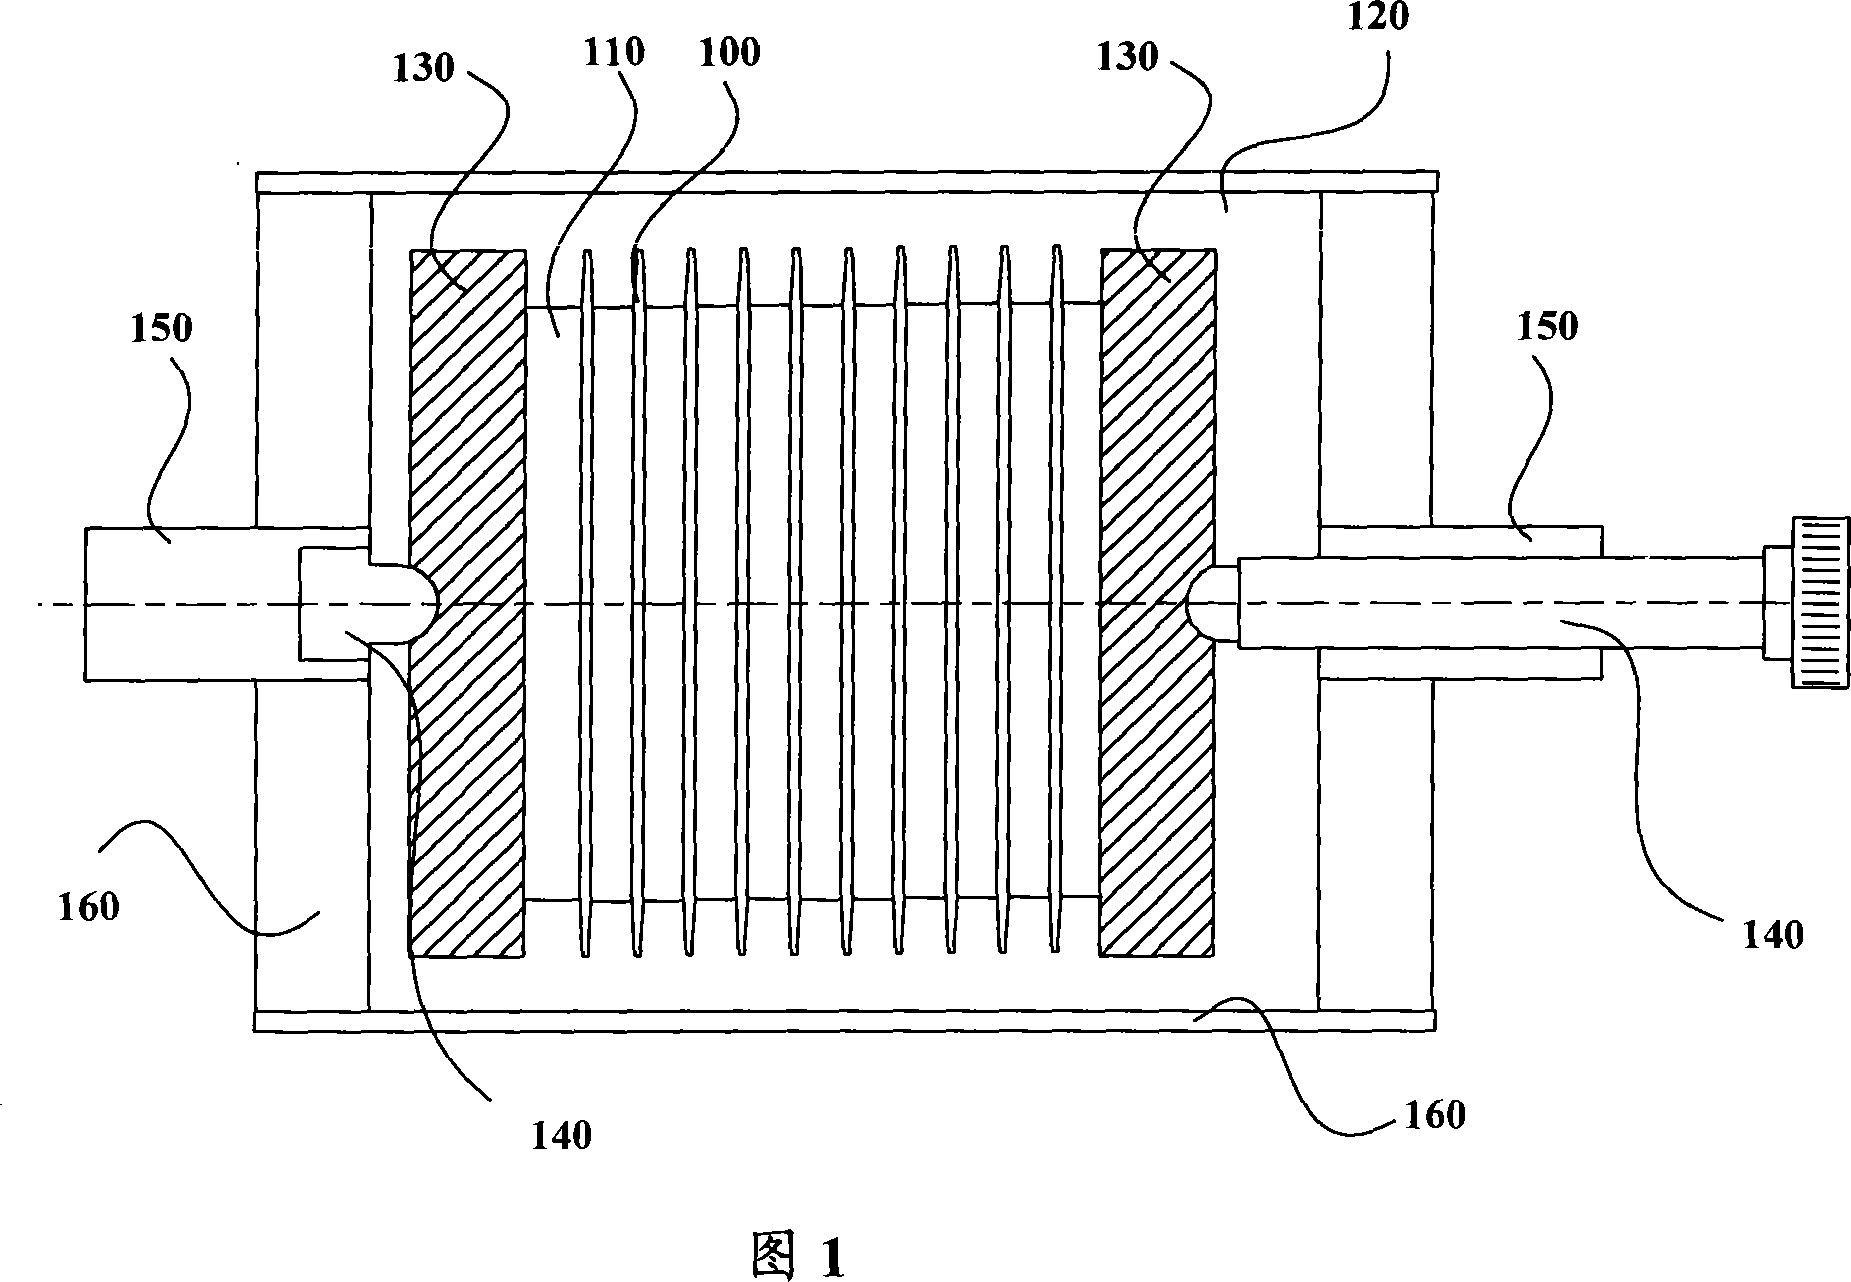 A chip table top etching device